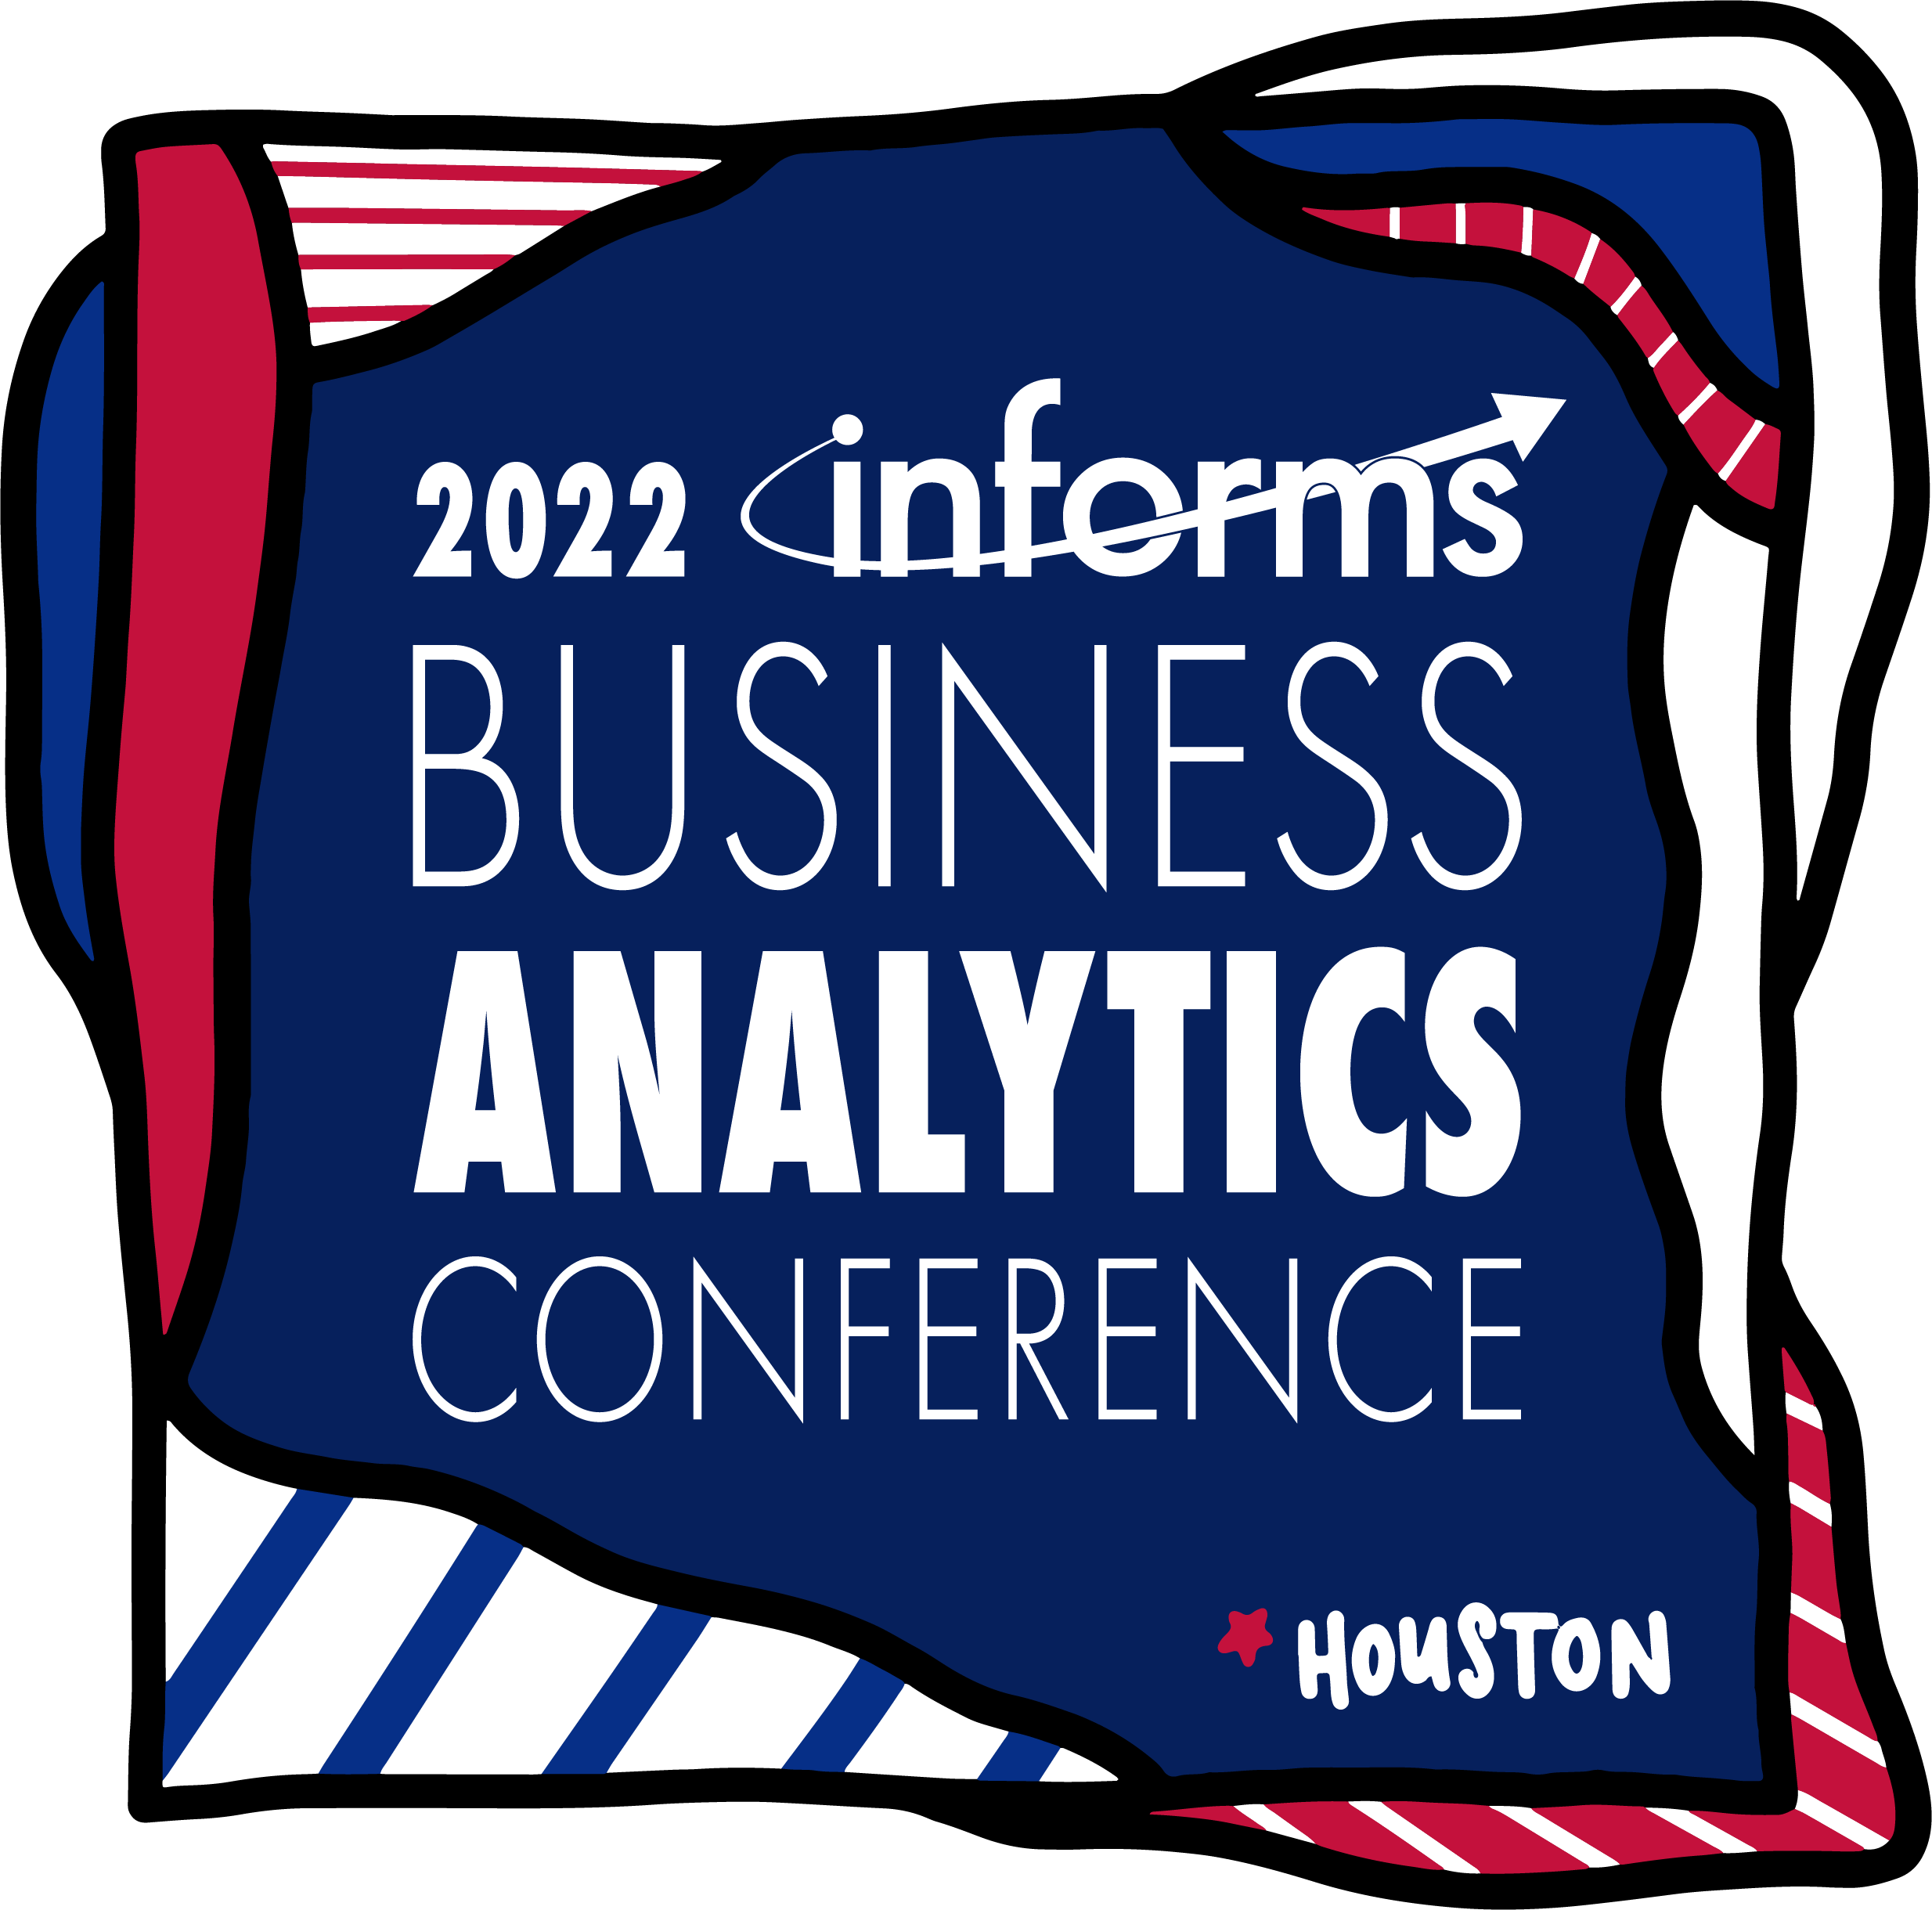 Informs 2022 Schedule Home - 2022 Informs Business Analytics Conference